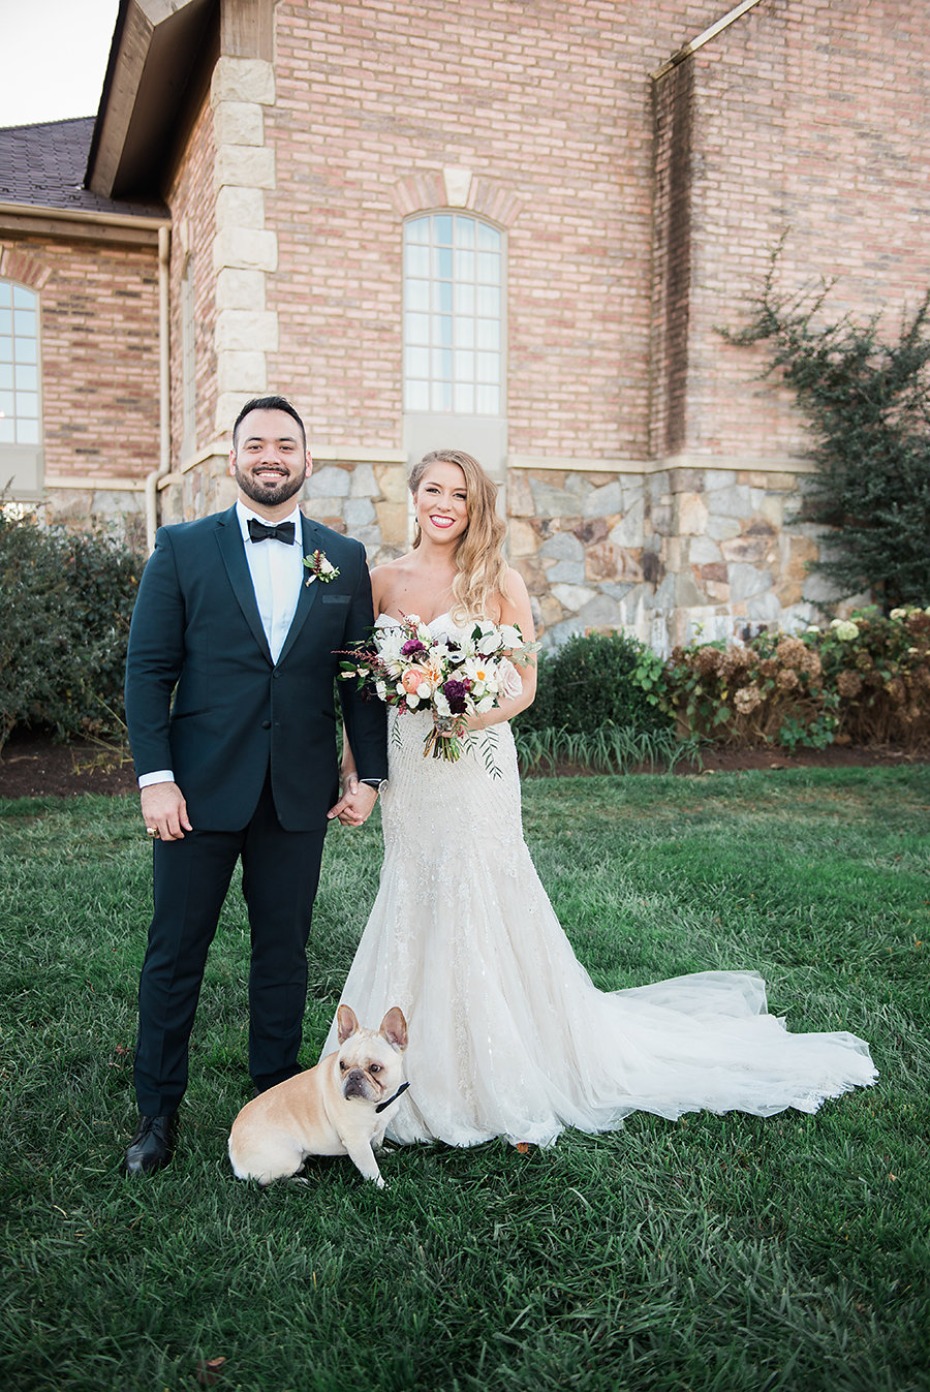 Beautiful couple and pup